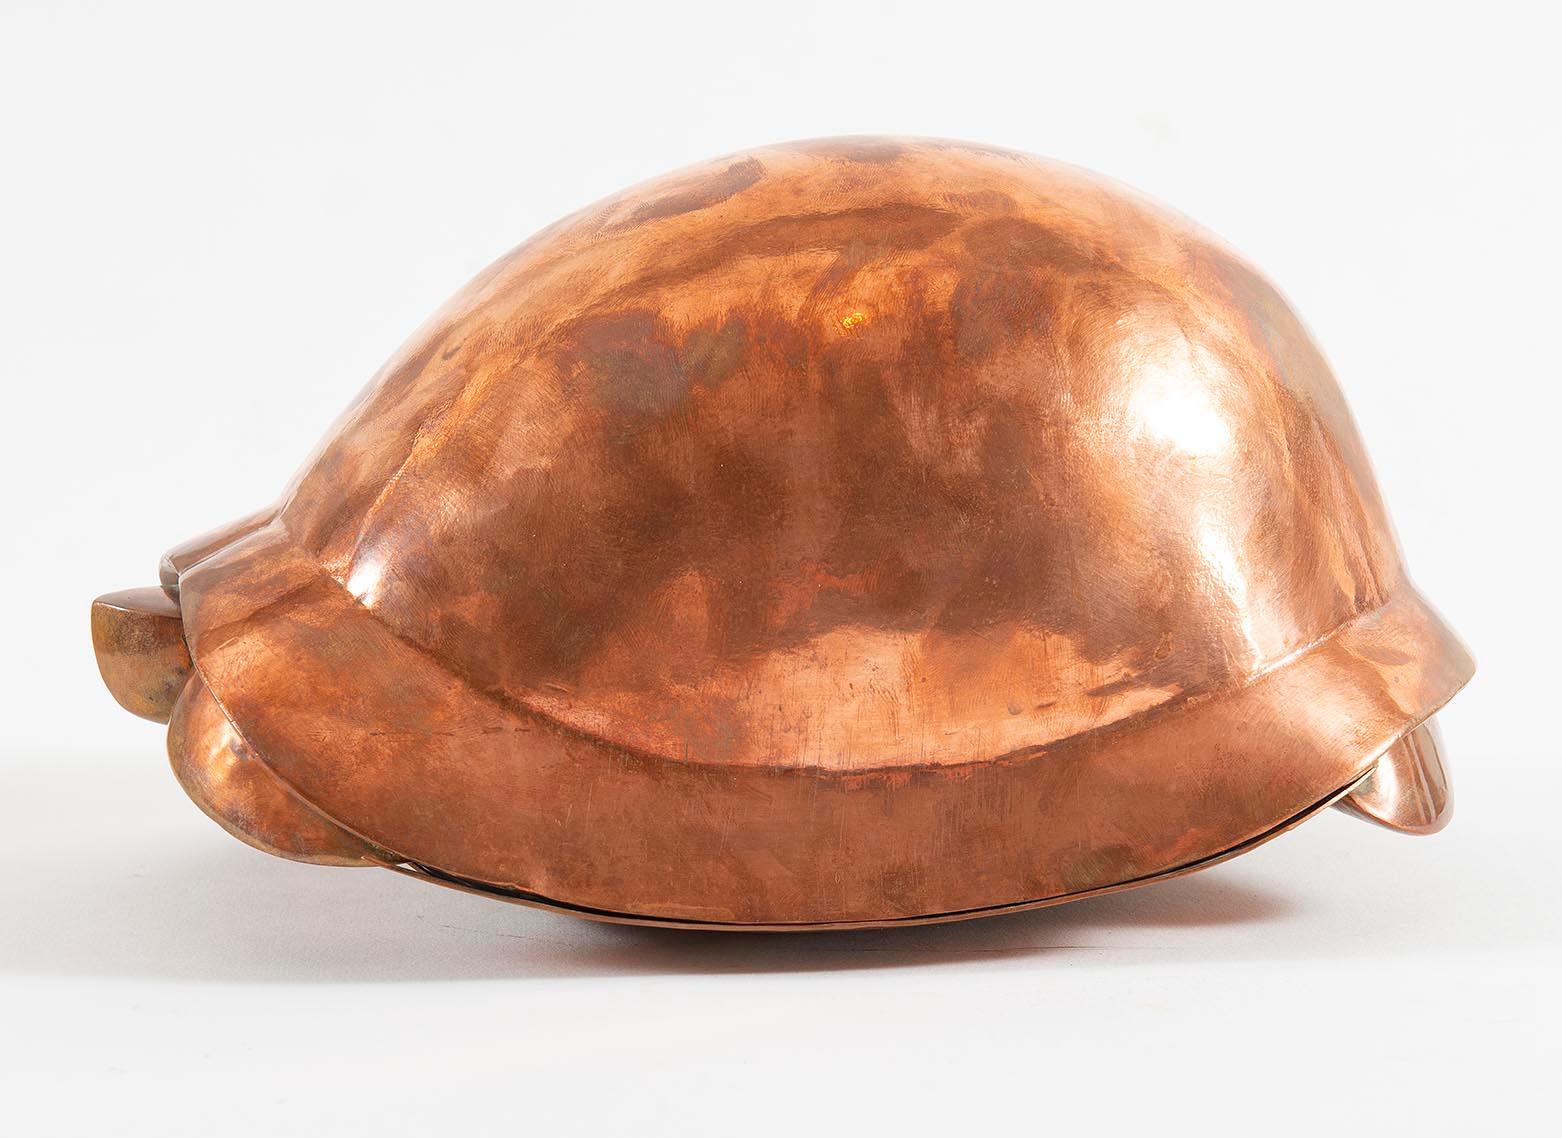 Turtle, by Fx lalanne, Sculpture, Design, Copper, 1970's, ashtray, animal - Contemporary Print by Francois-Xavier Lalanne